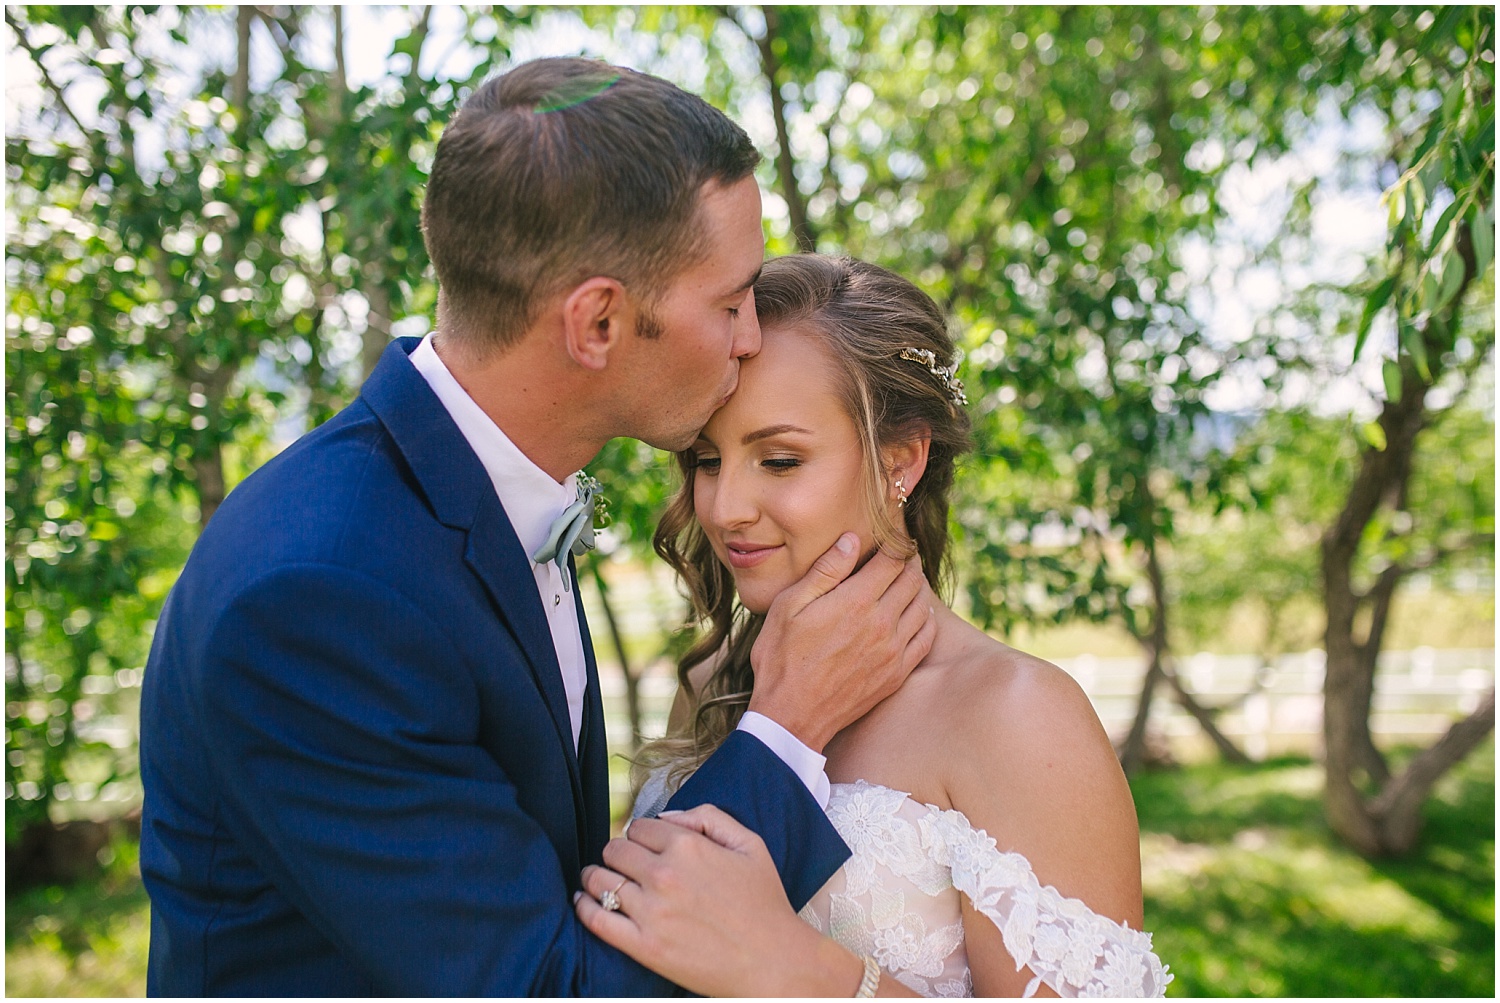 Groom in navy suit kisses his bride on the forehead at Crooked Willow Farms wedding